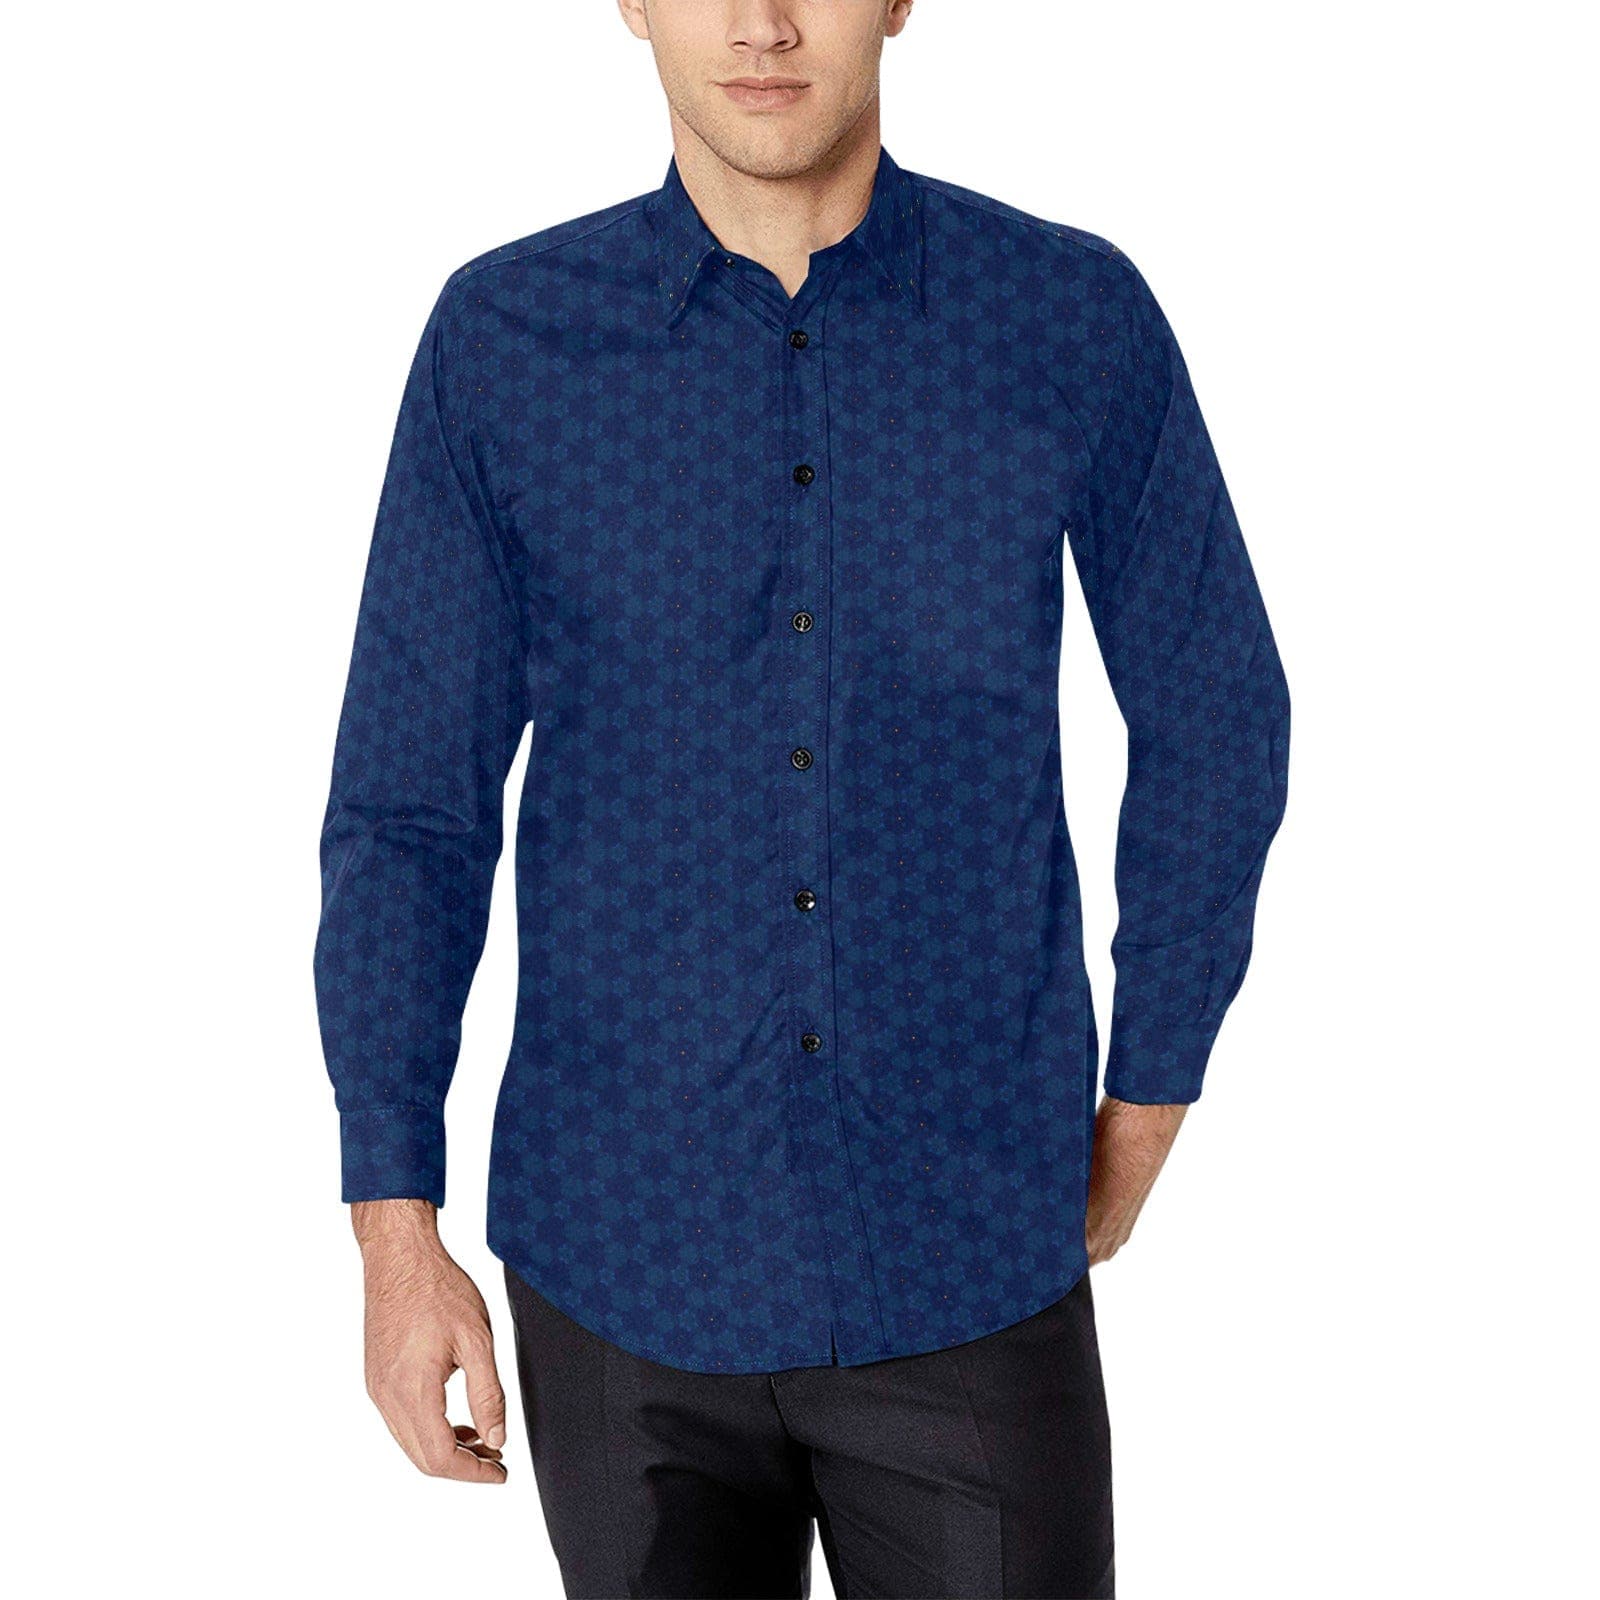 Deep Night Blue with Octagonal Bluer Patterned Shirt for Men Long Sleeve Shirt (Without Pocket)